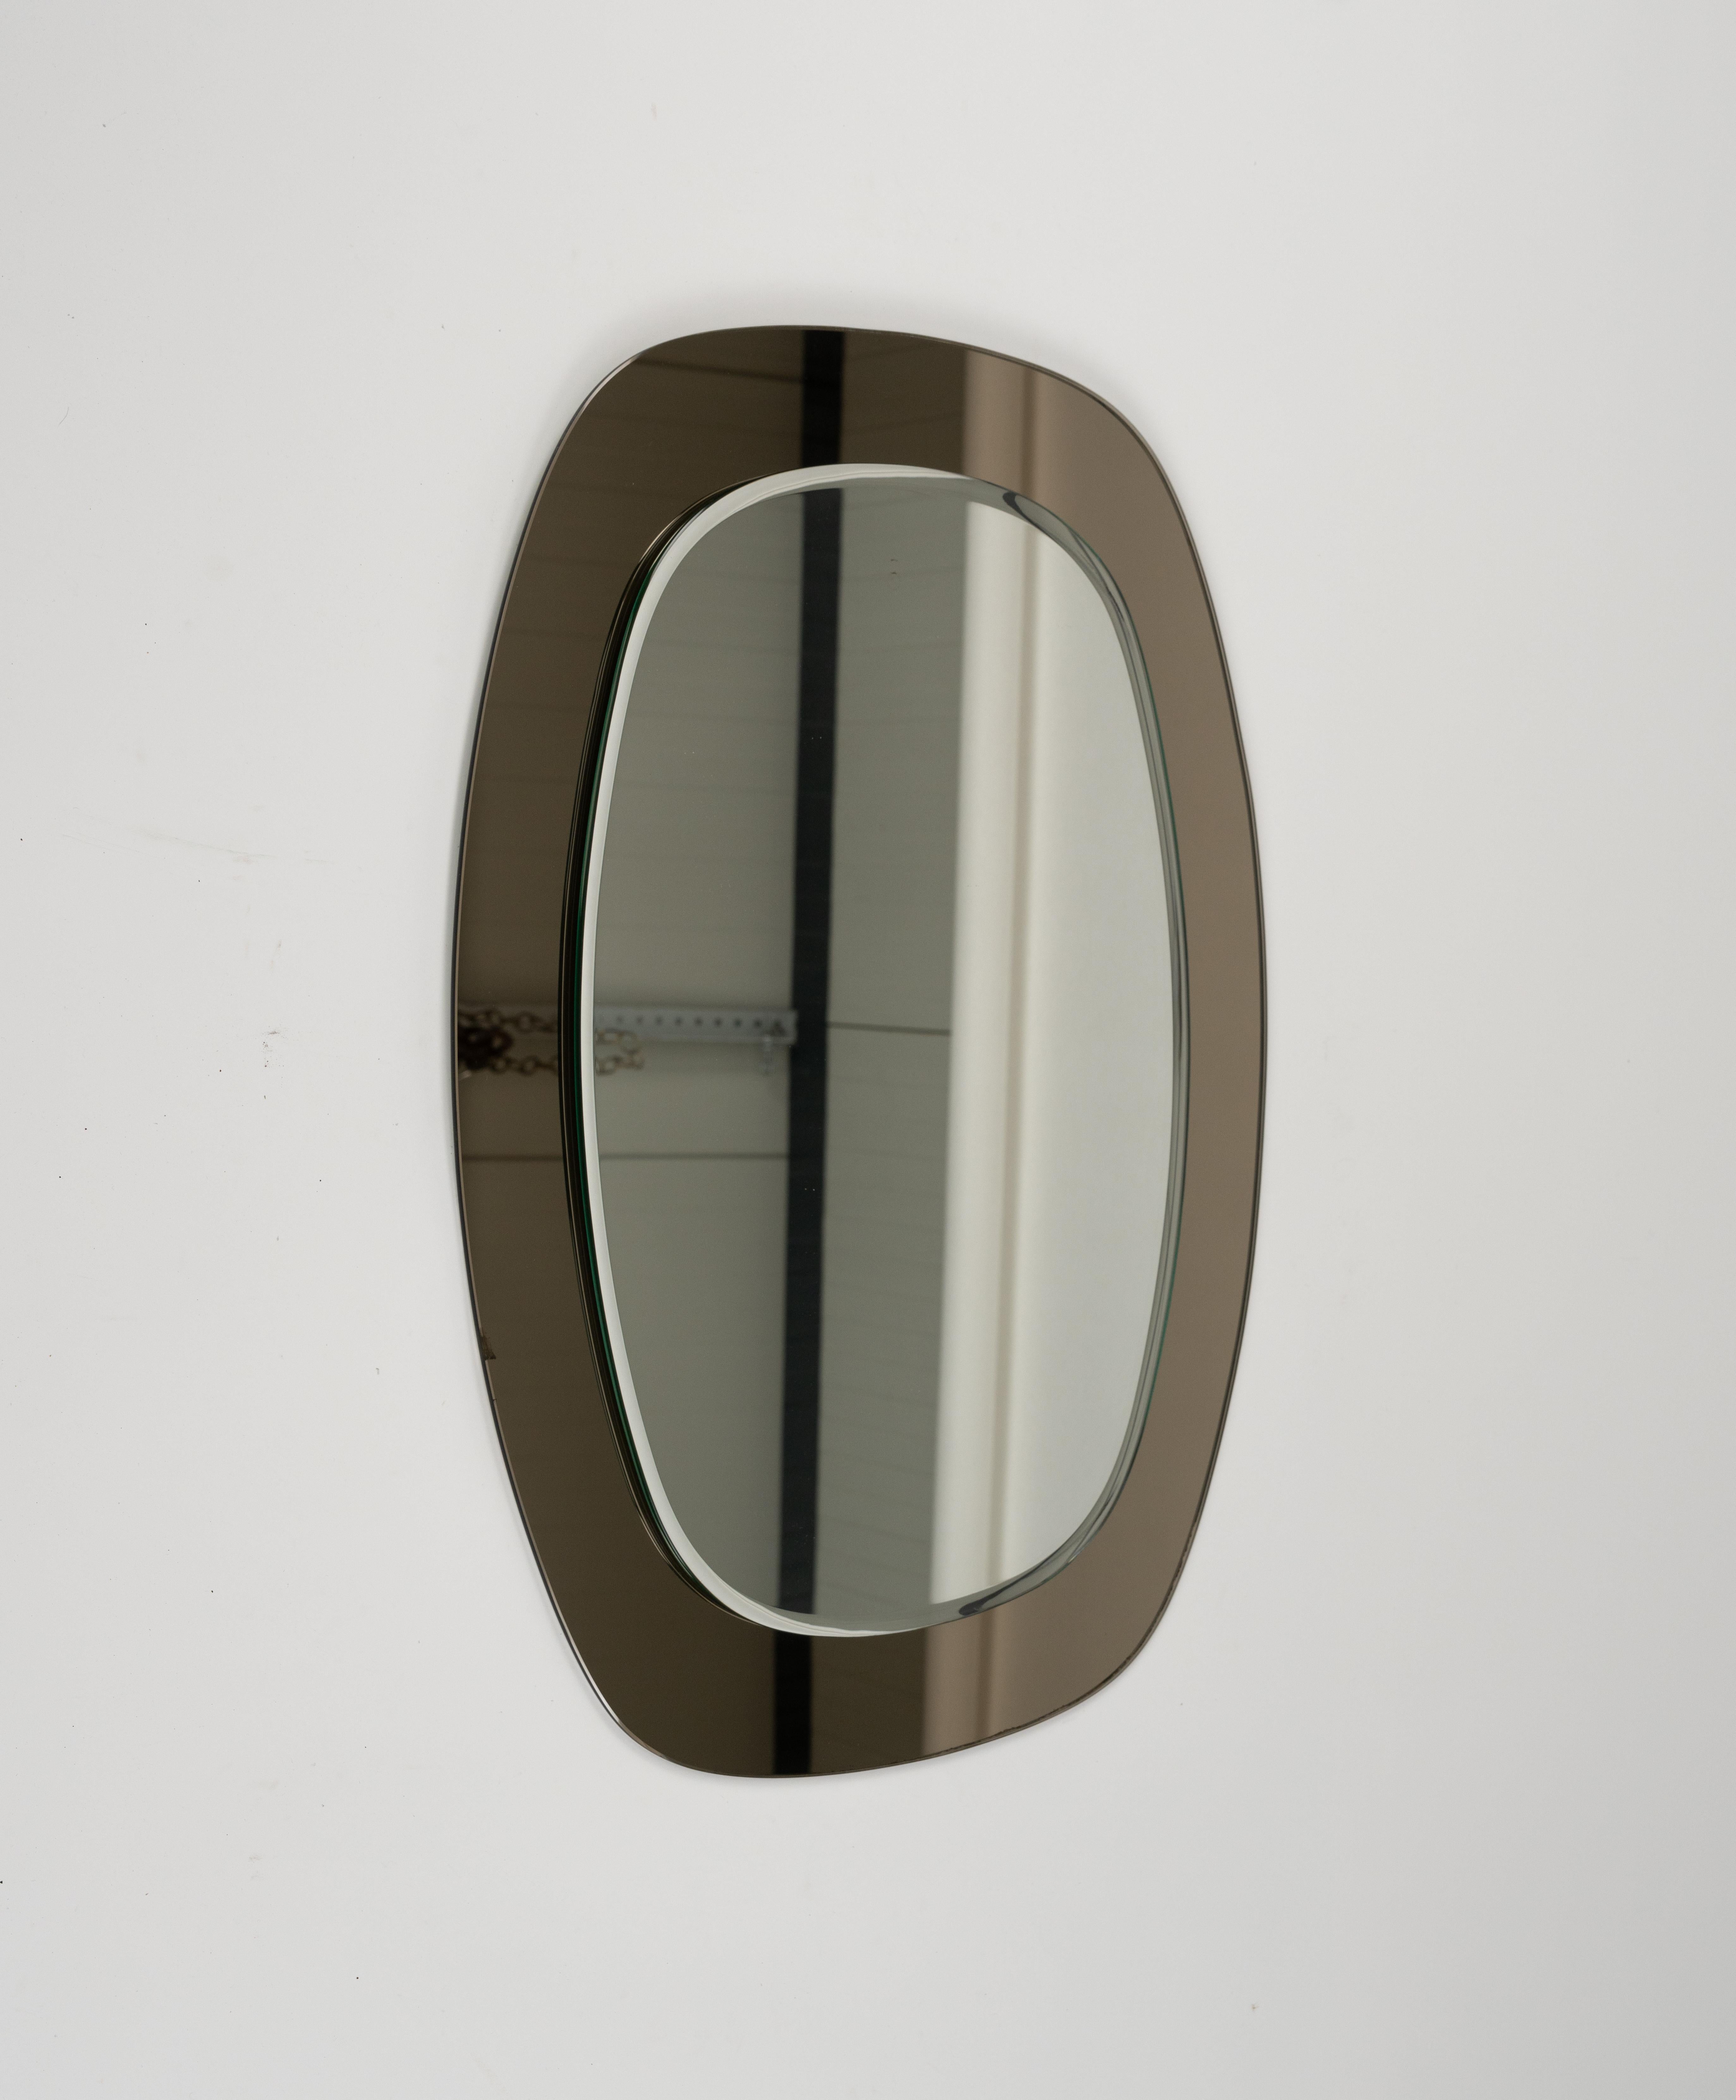 Midcentury Cristal Art Oval Wall Mirror with Smoked Frame, Italy 1960s In Good Condition For Sale In Rome, IT